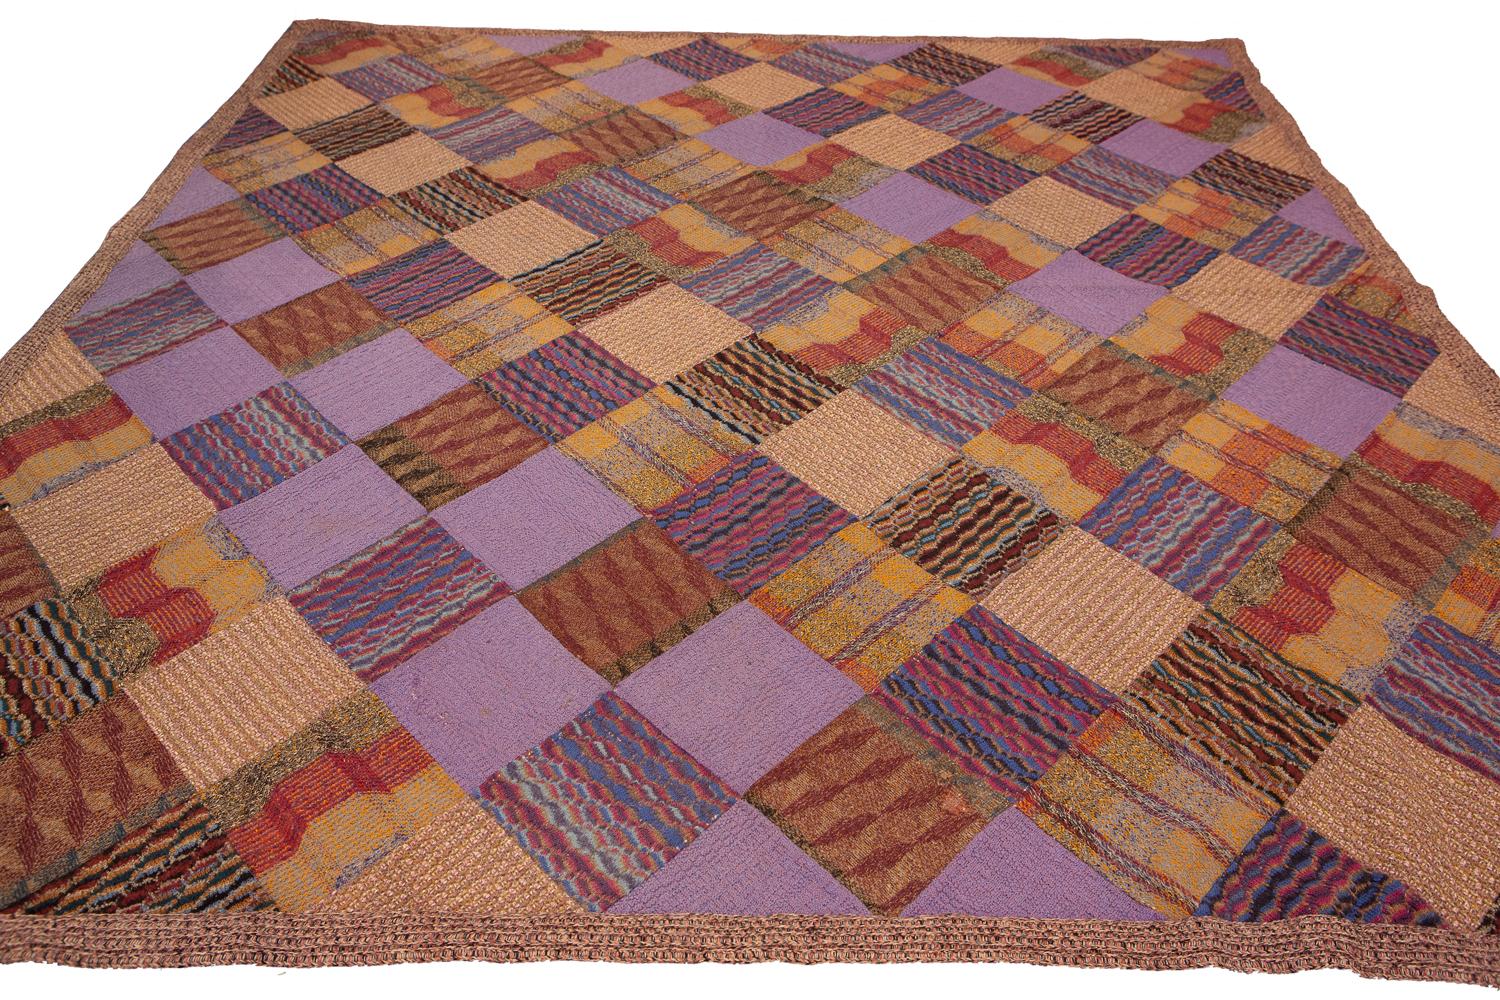 This is a one-of-a-kind Italian vintage carpet, woven circa 1920-1950. It's made of wool, and measures 242 x 226 cm in size. The beautiful design is a work of famous designer called Ottavio Missoni, and the colors are rich and amazing. This would be